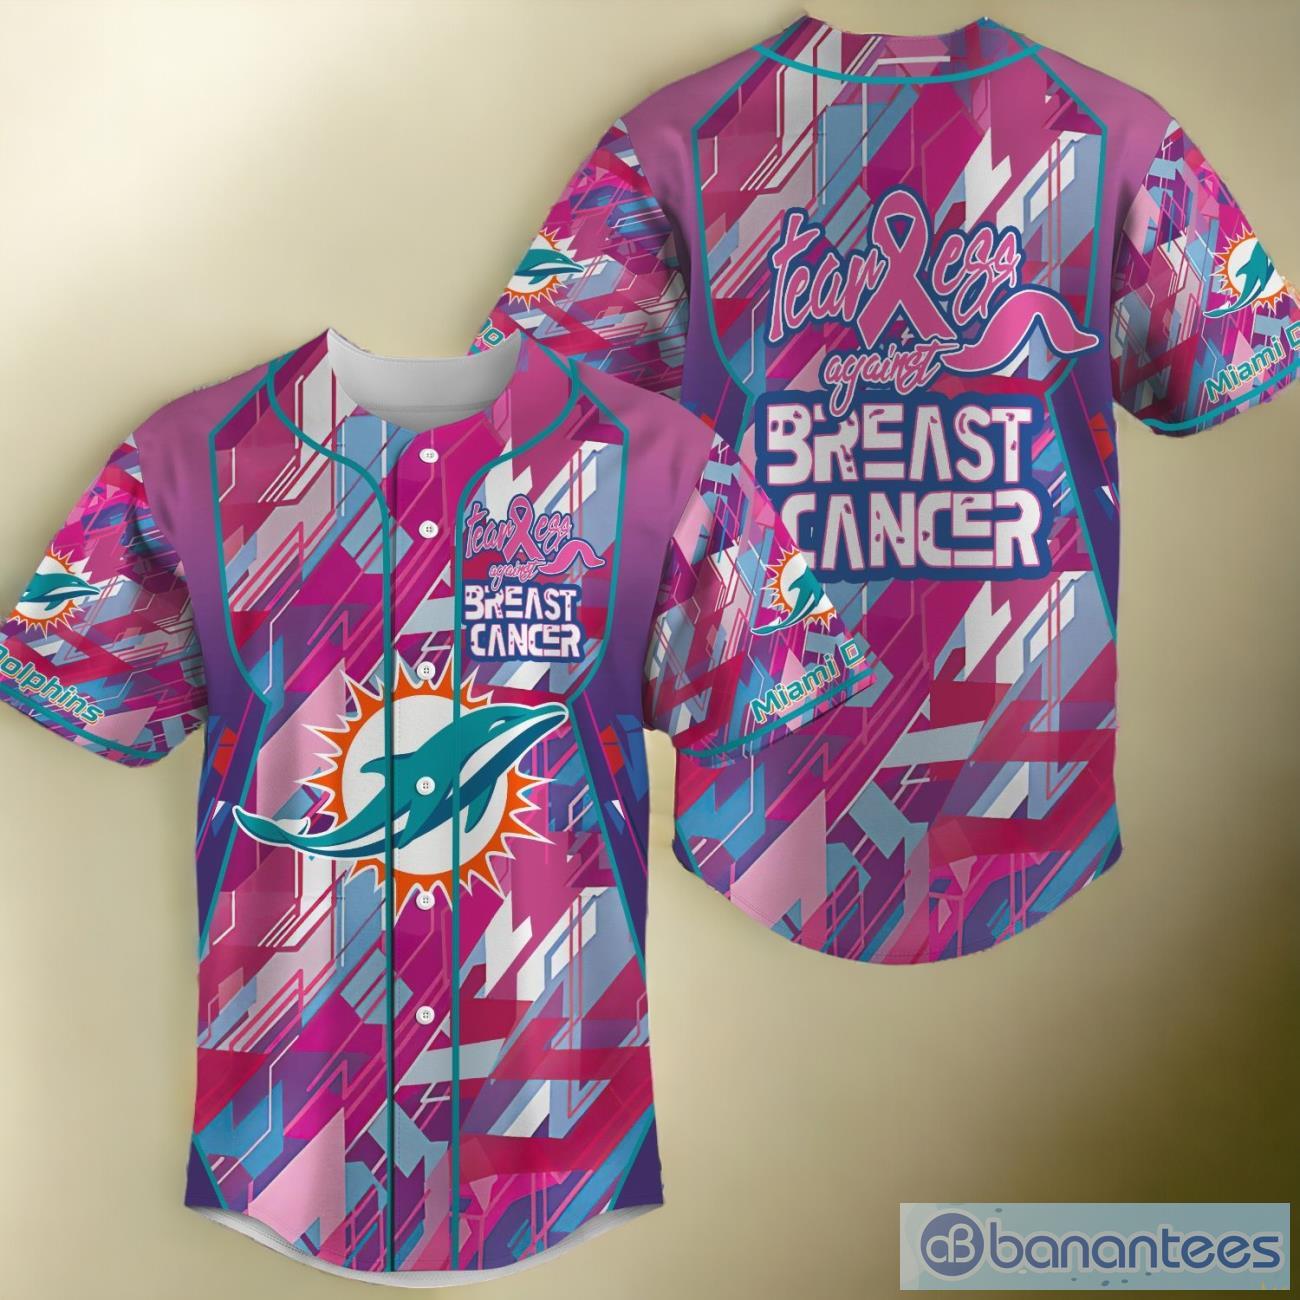 Miami Dolphins Shop - NFL Miami Dolphins Pink Can Fearless Again Breast Cancer Baseball Jersey